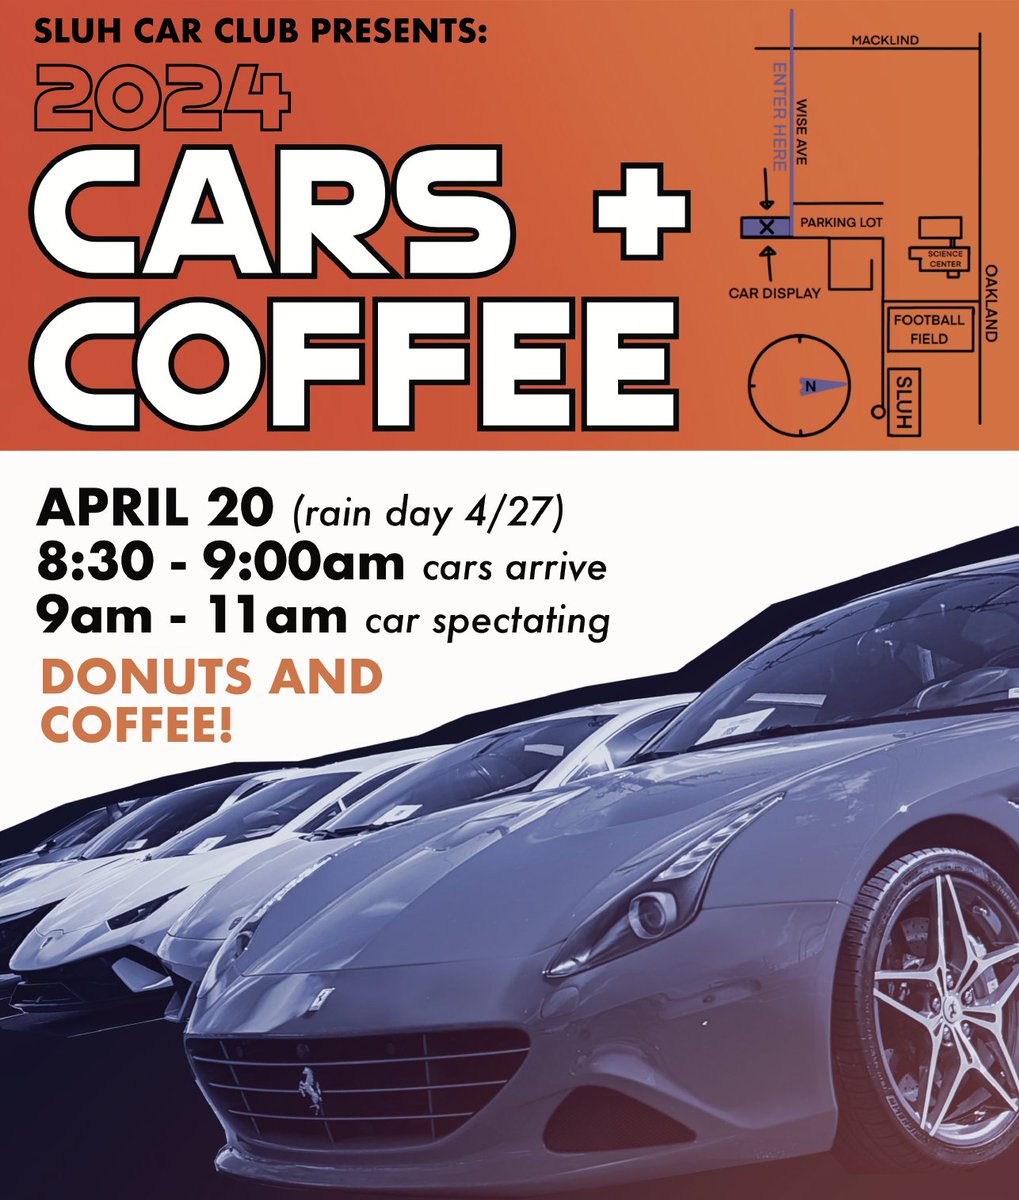 The SLUH Car Club invites all car enthusiasts to Cars & Coffee on Saturday, April 20. Show your car or just share your passion for automobiles. Learn more and register your car at: sluhcarclub.com #SLUHLife